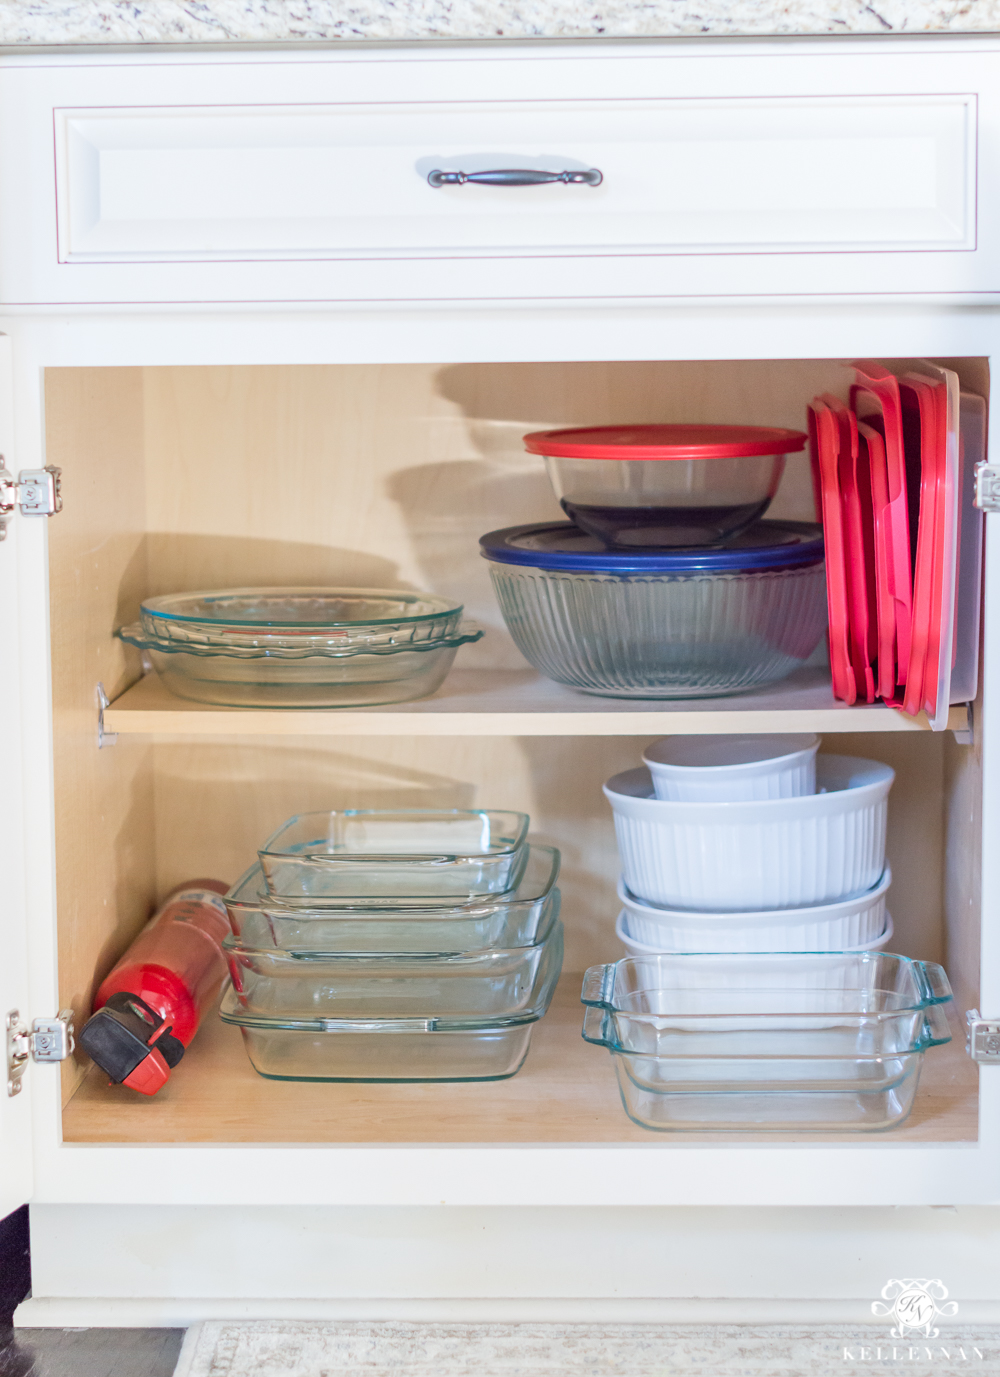 Organizing baking and casserole dishes in the kitchen